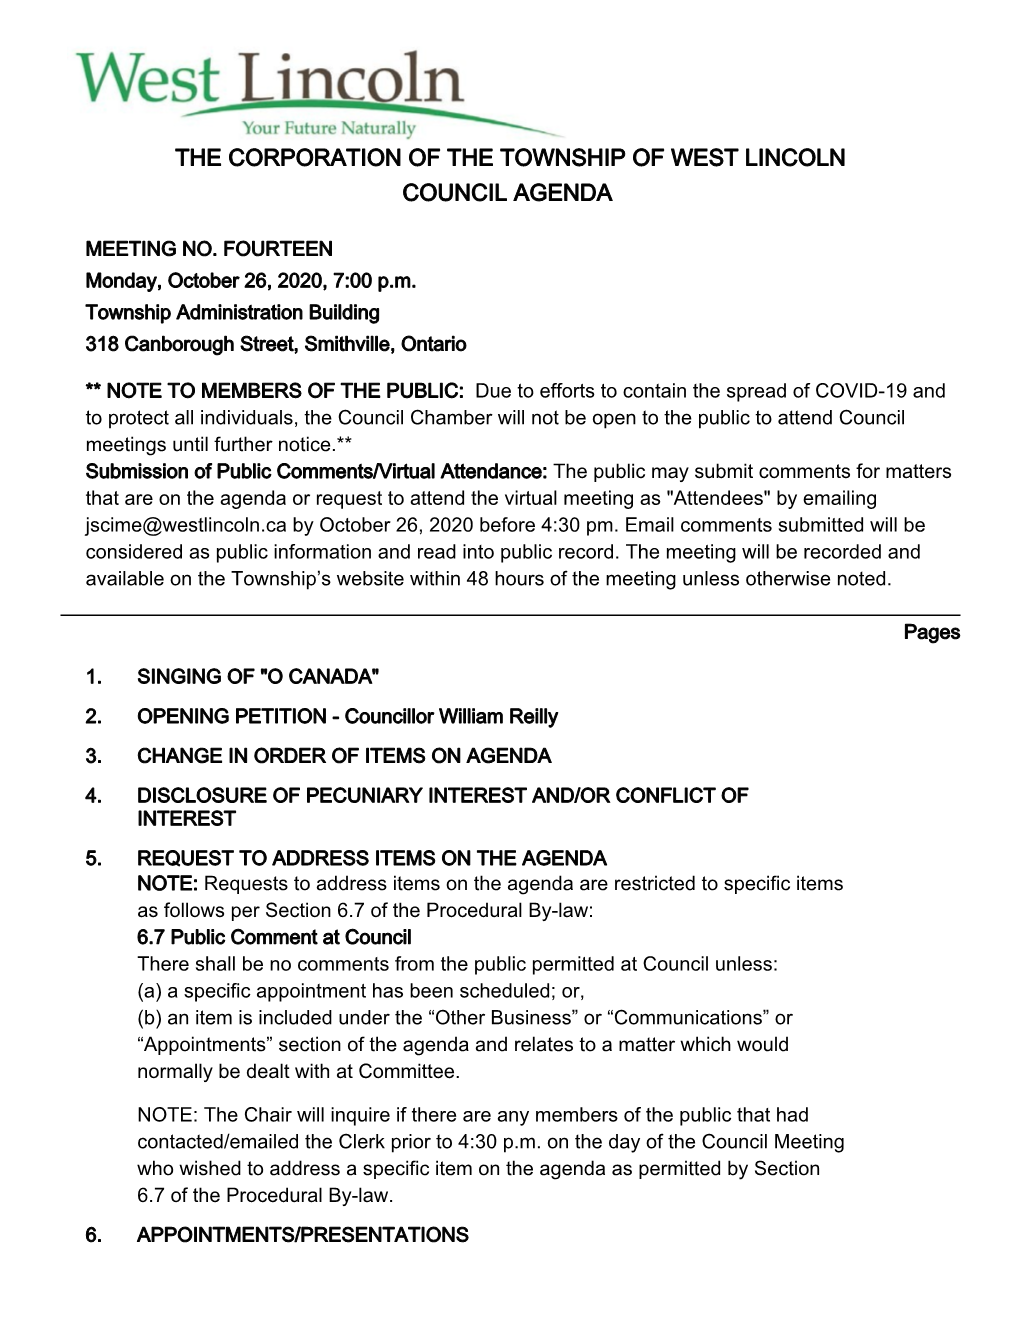 The Corporation of the Township of West Lincoln Council Agenda